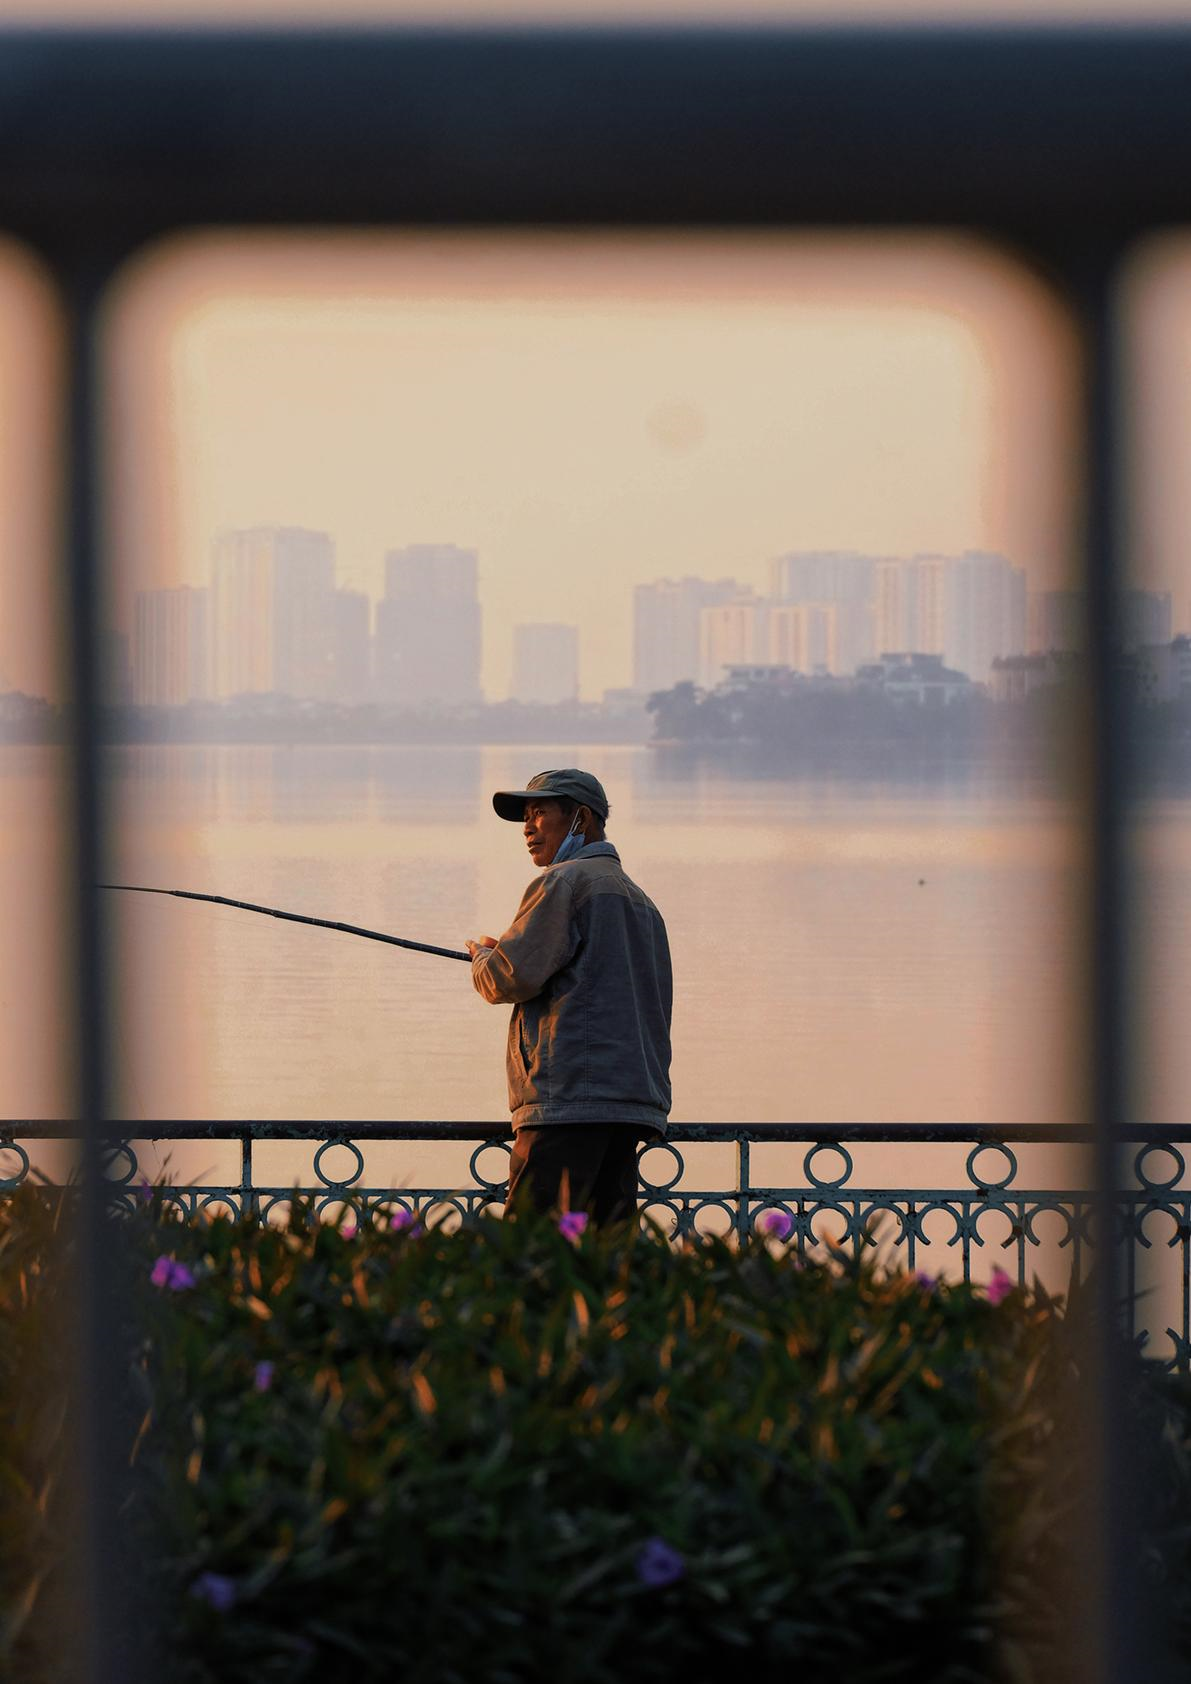 Fishing in the late afternoon capturing the tranquillity at the end of the day. Photo courtesy of Swinburne Vietnam